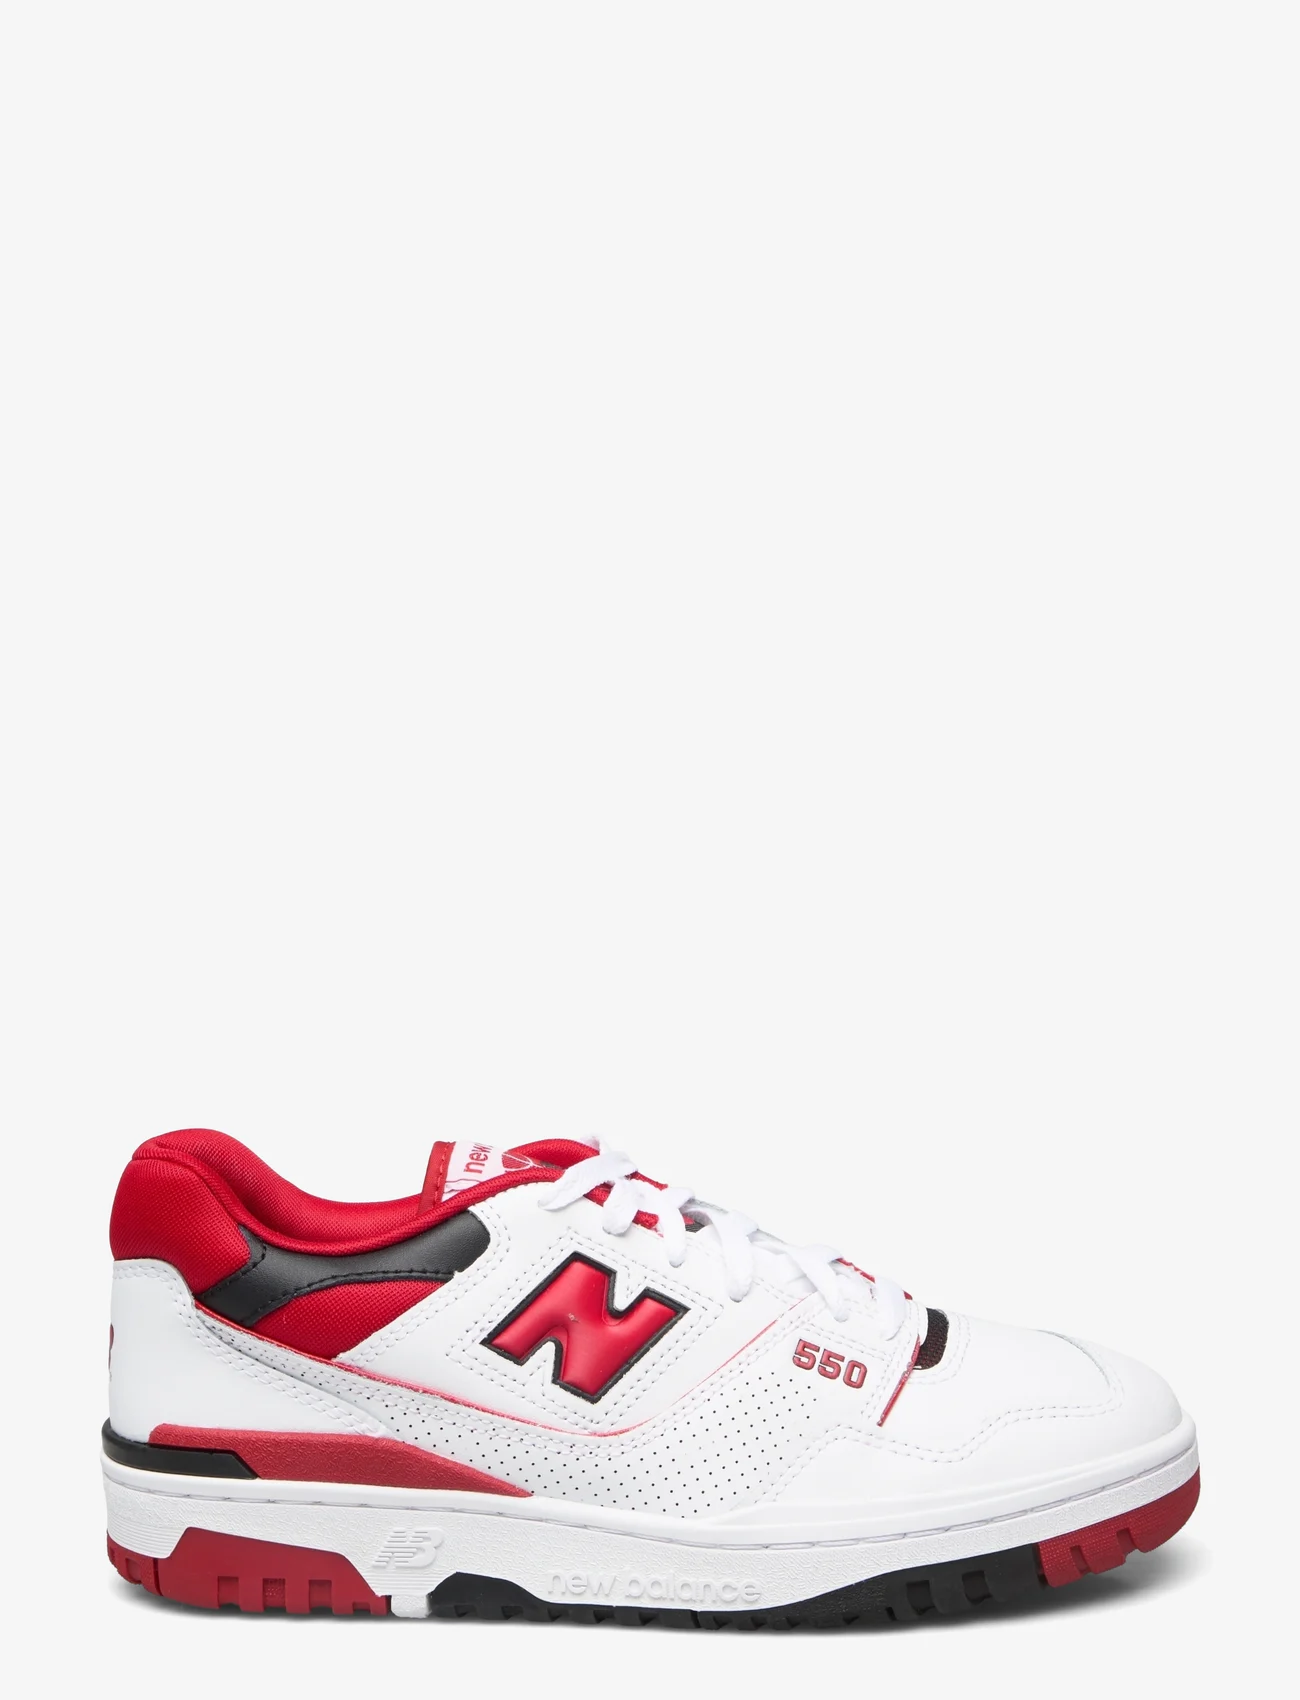 New Balance - New Balance 550 - low tops - white/red - 1